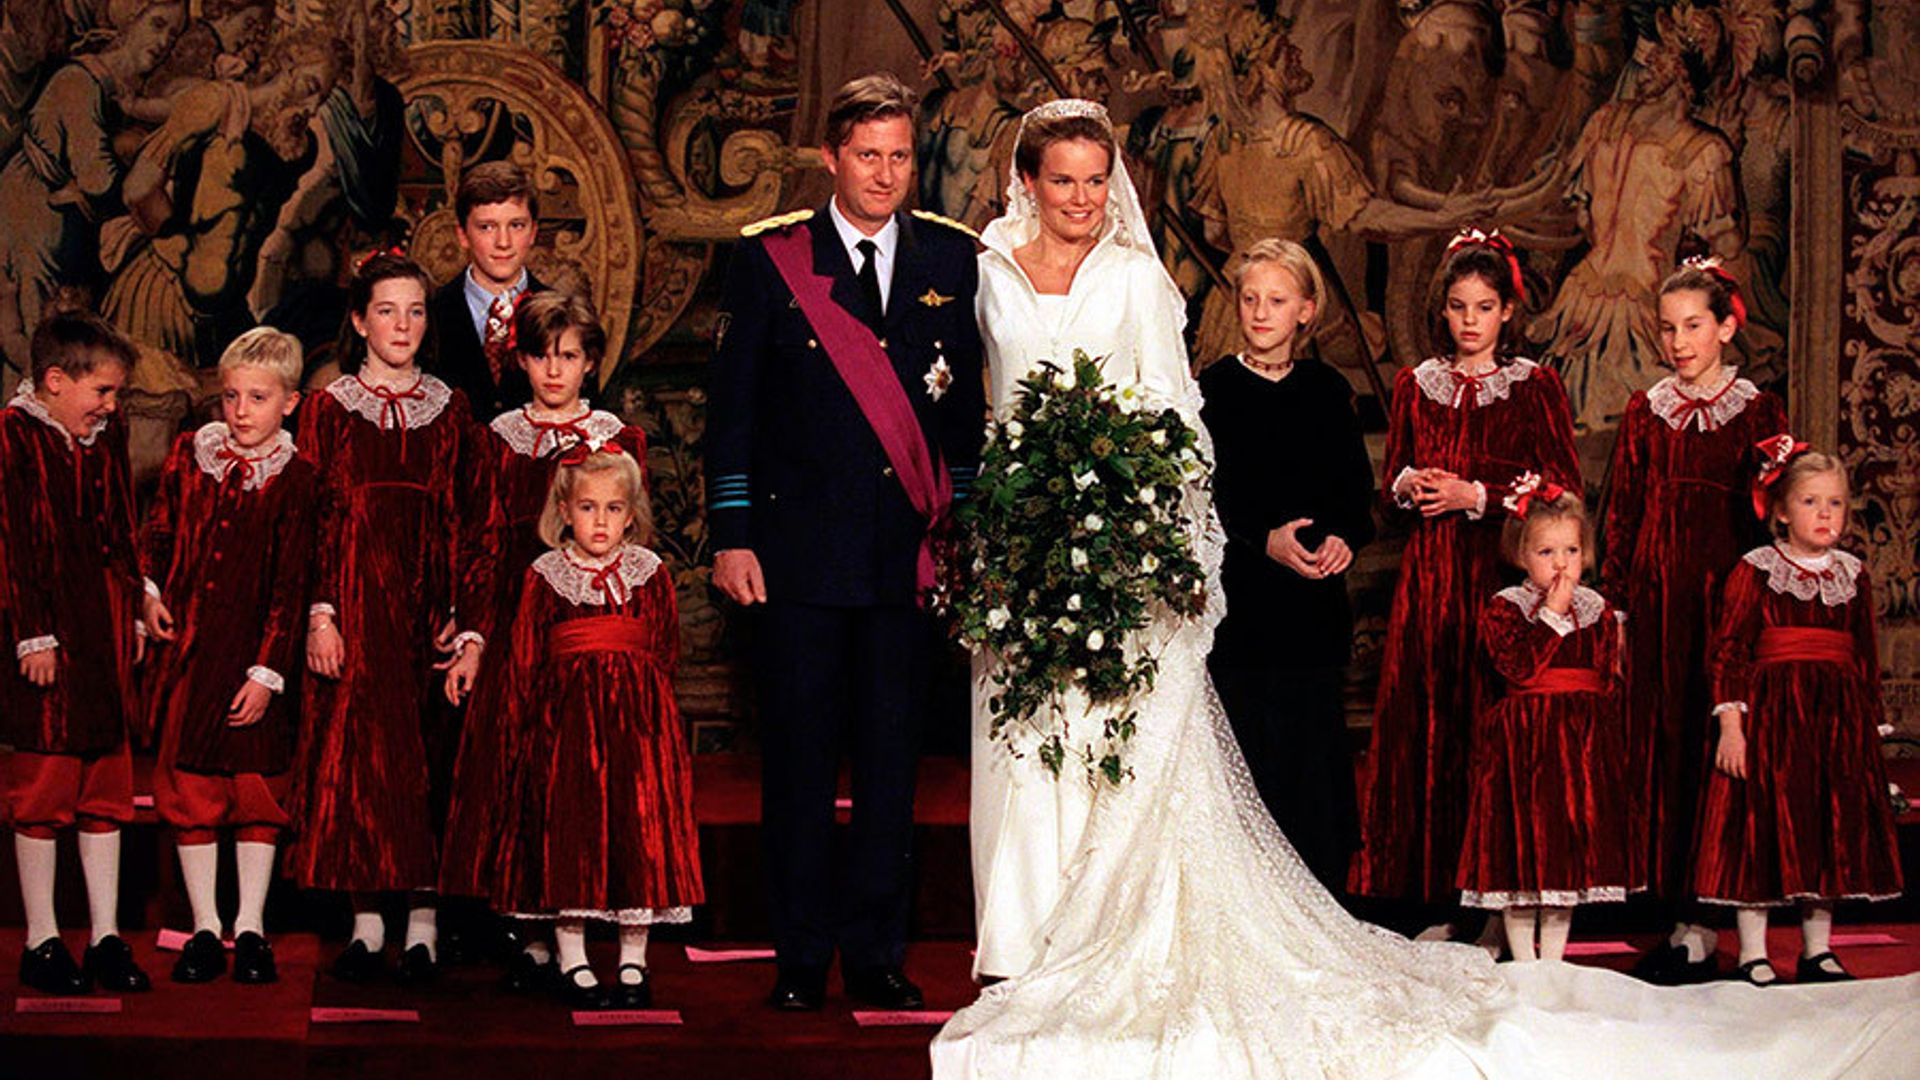 King Philippe and Queen Mathilde of Belgium's royal wedding: A photo album